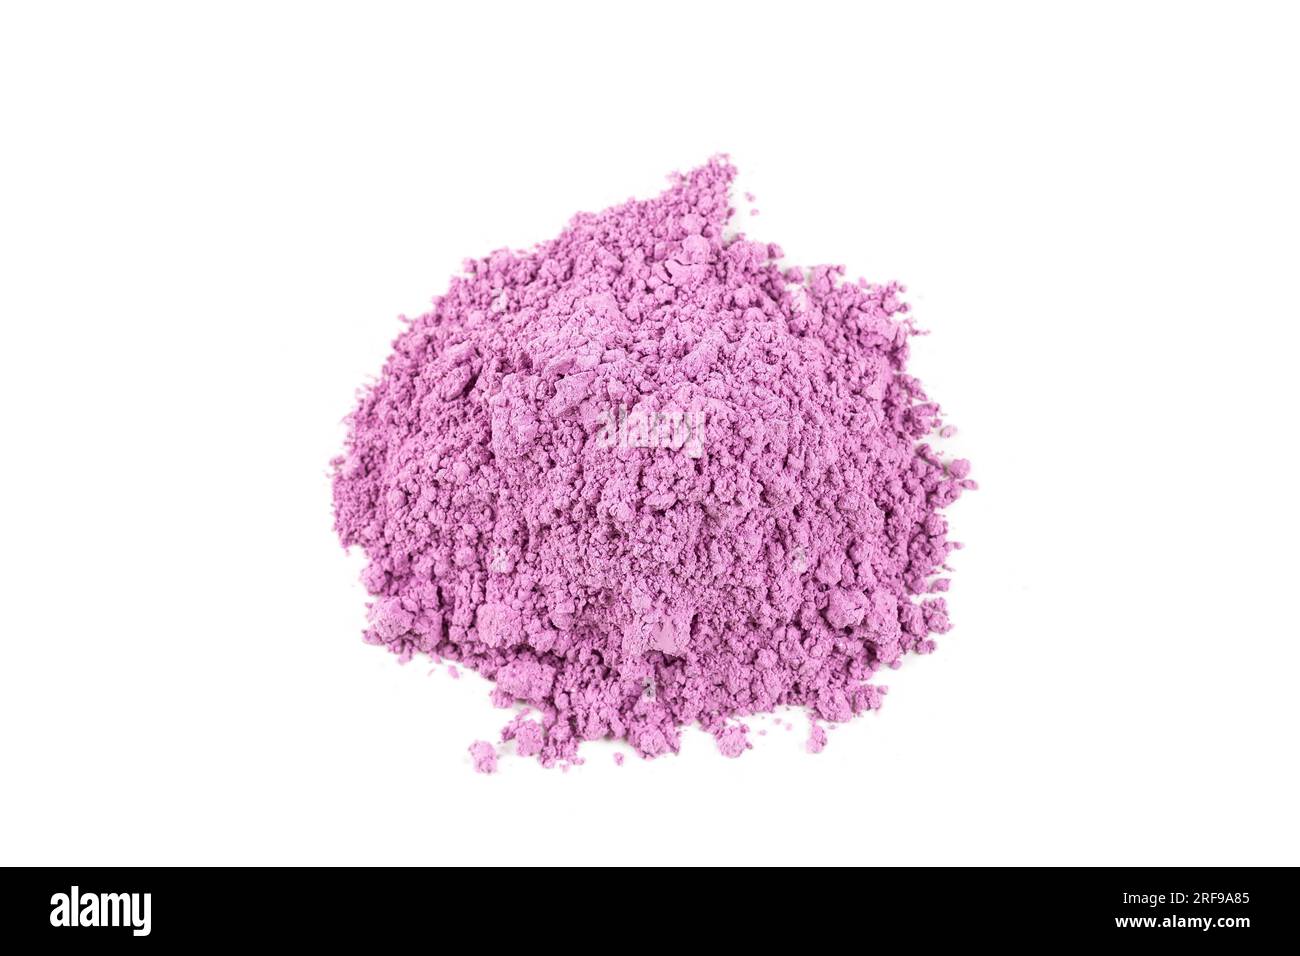 Heap of superfine purple clay on white background. Stock Photo